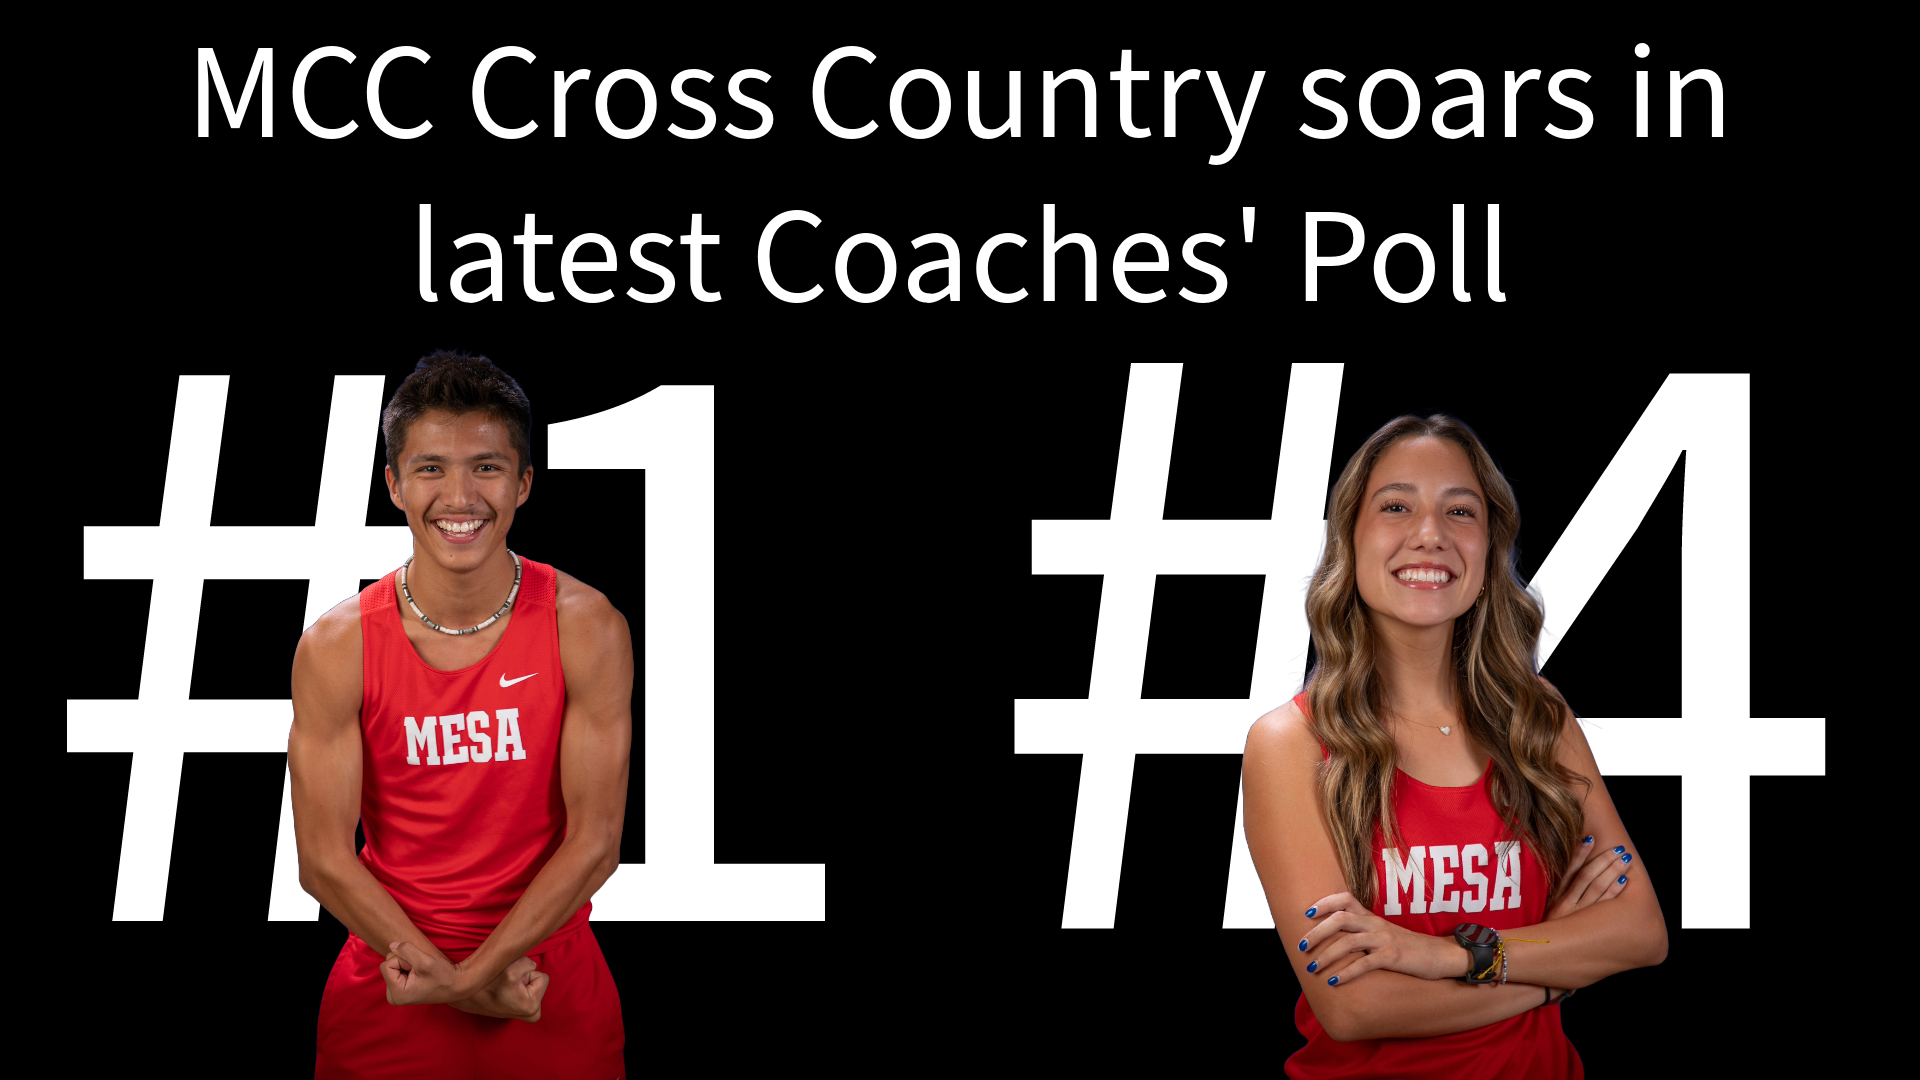 Men's XC soars to top spot in nation while Women's XC claims fourth best.